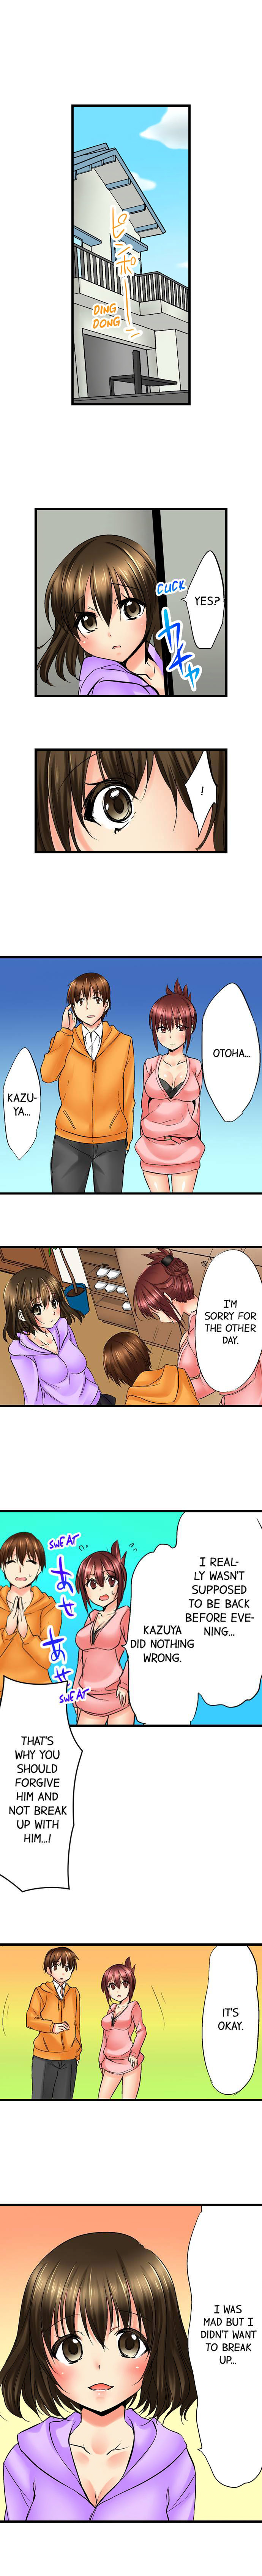 Touching My Older Sister Under the Table - Chapter 12 Page 8